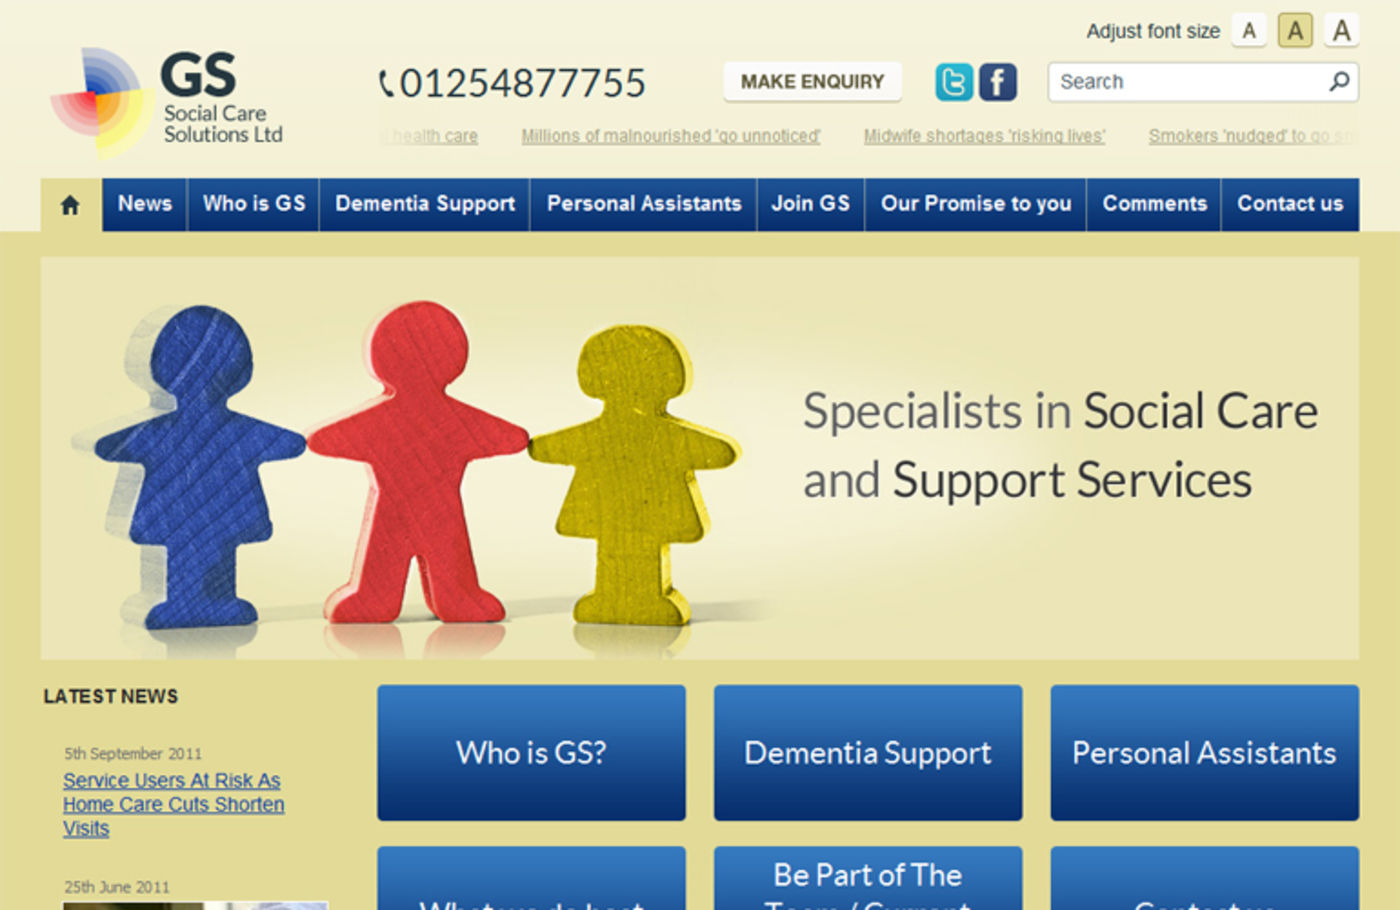 GS Social Care Solutions Ltd Homepage header